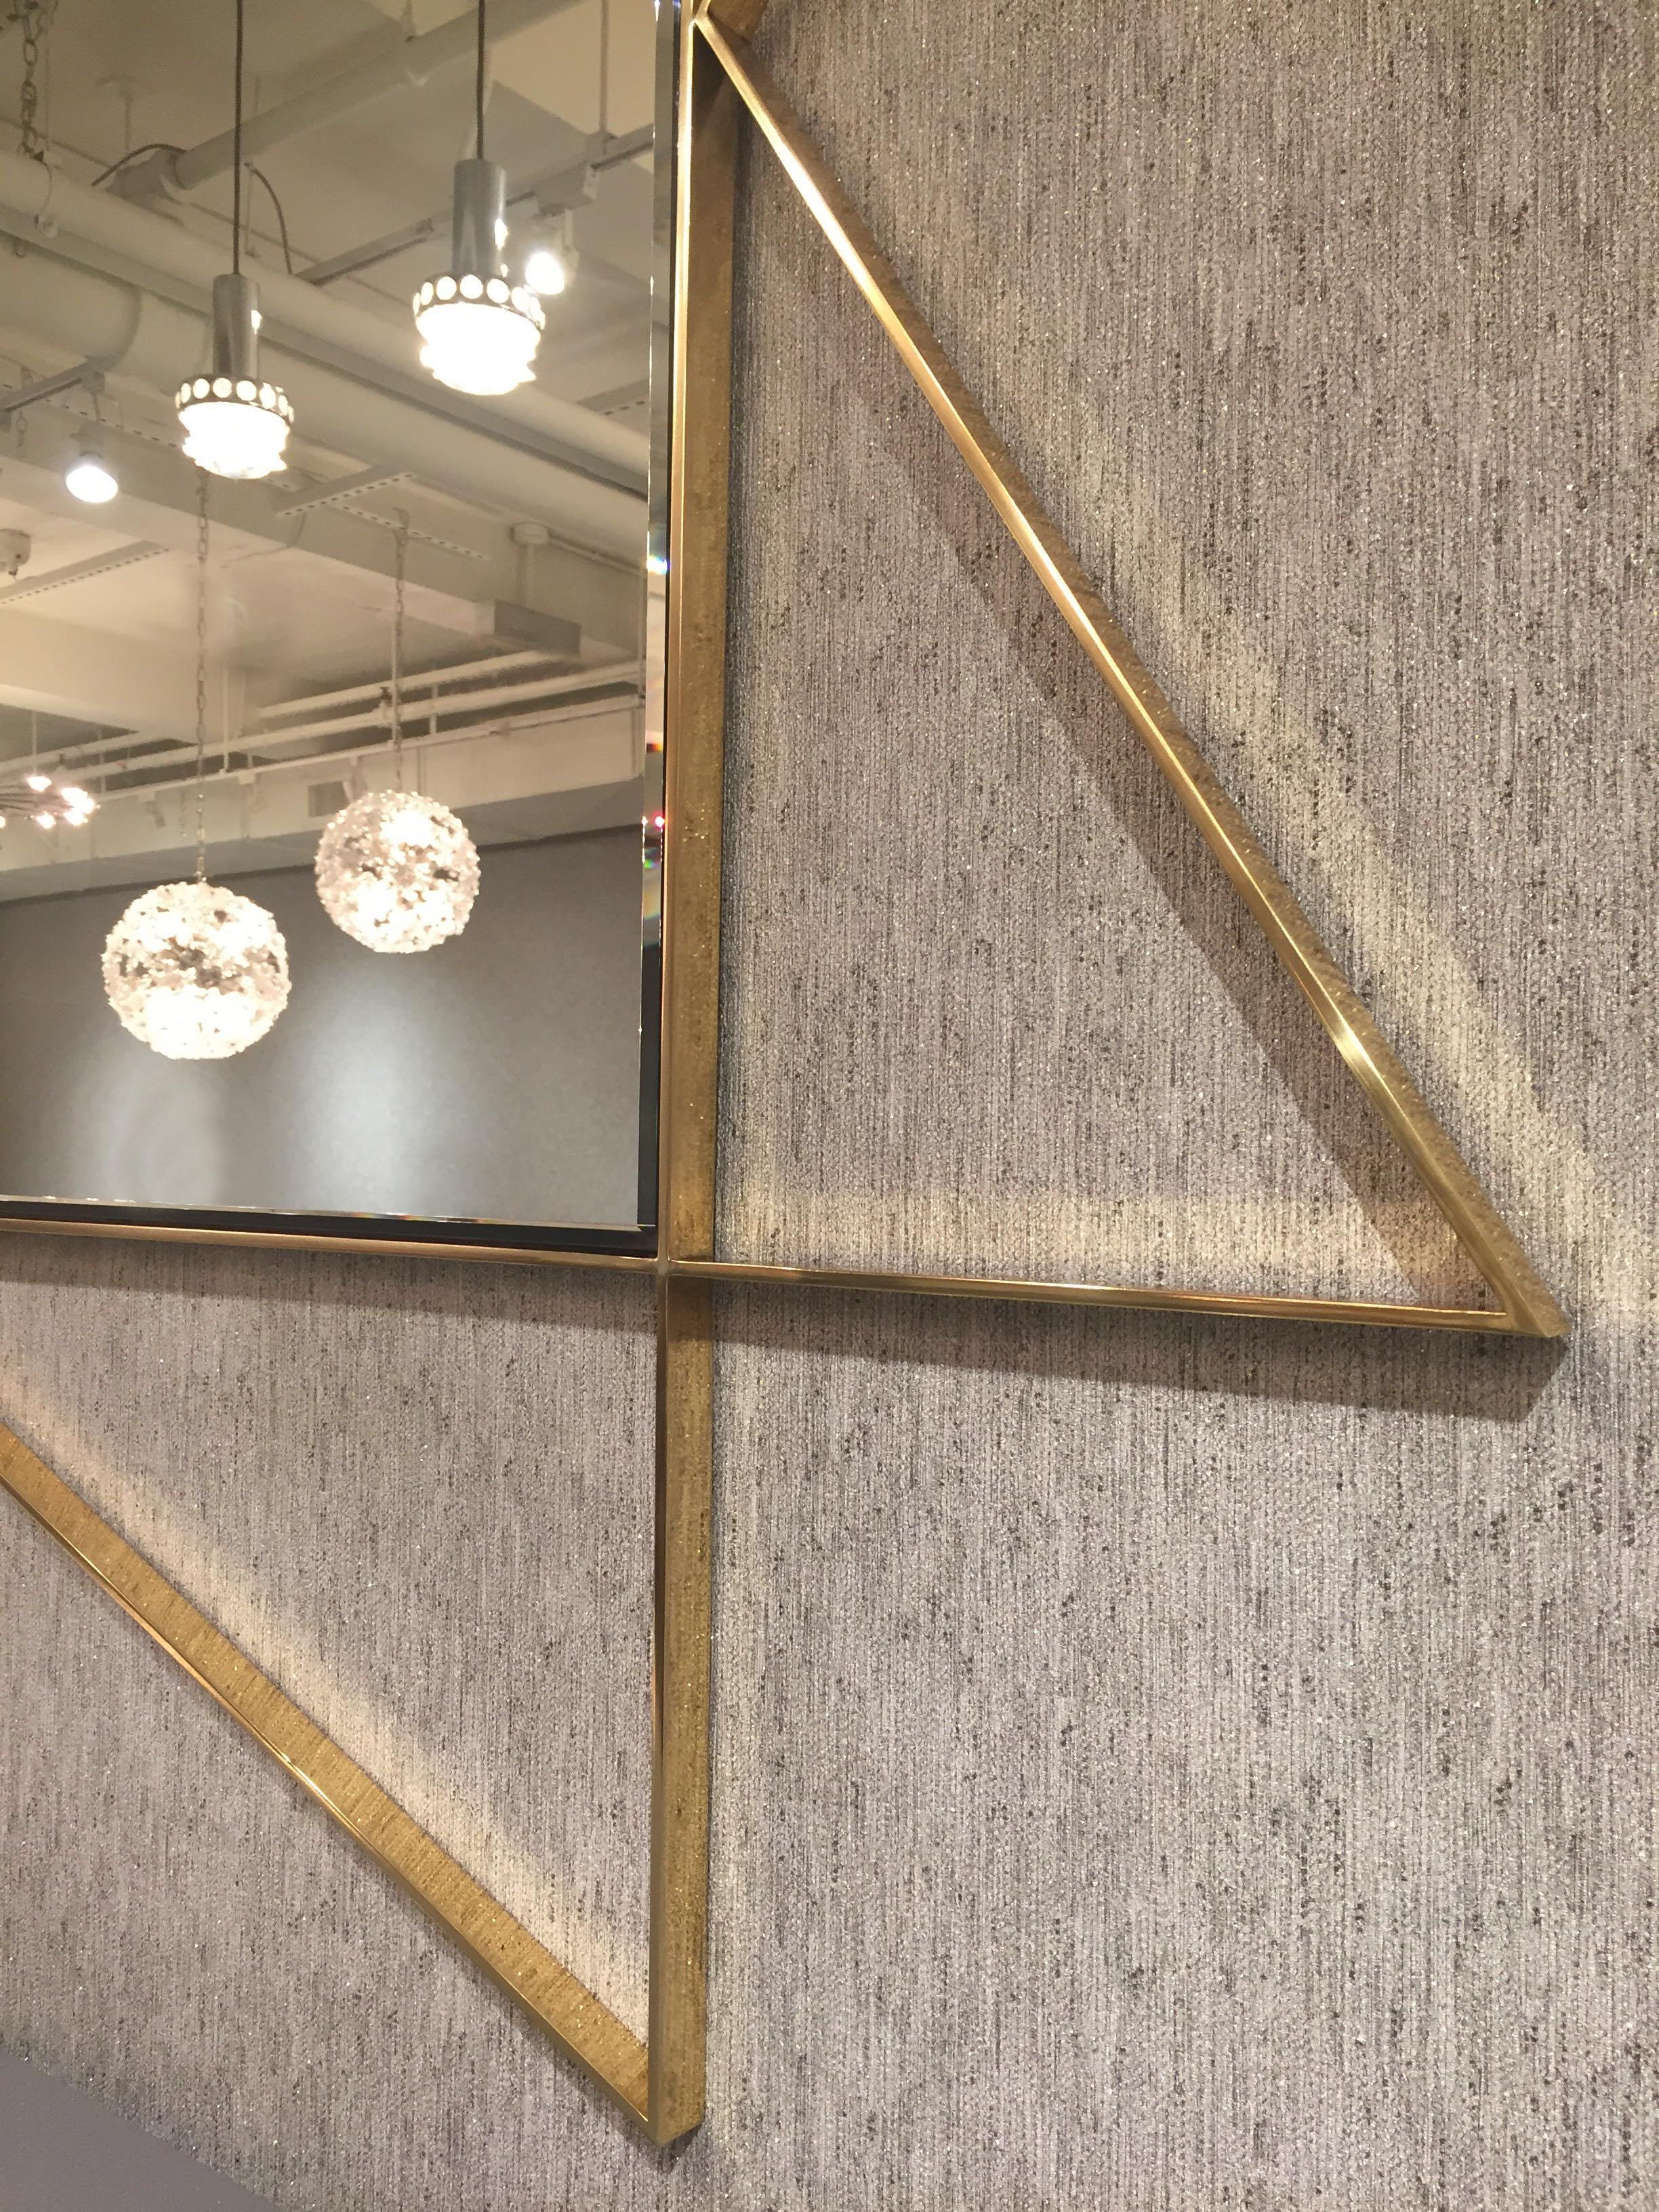 The Constellation mirror, designed by Irwin Feld Design for CF Modern, is a large beveled mirror with a distinctive solid brass frame. The outer portion of the frame is left open to show the chic brass against your wall. 

CF Moderrn merchandise